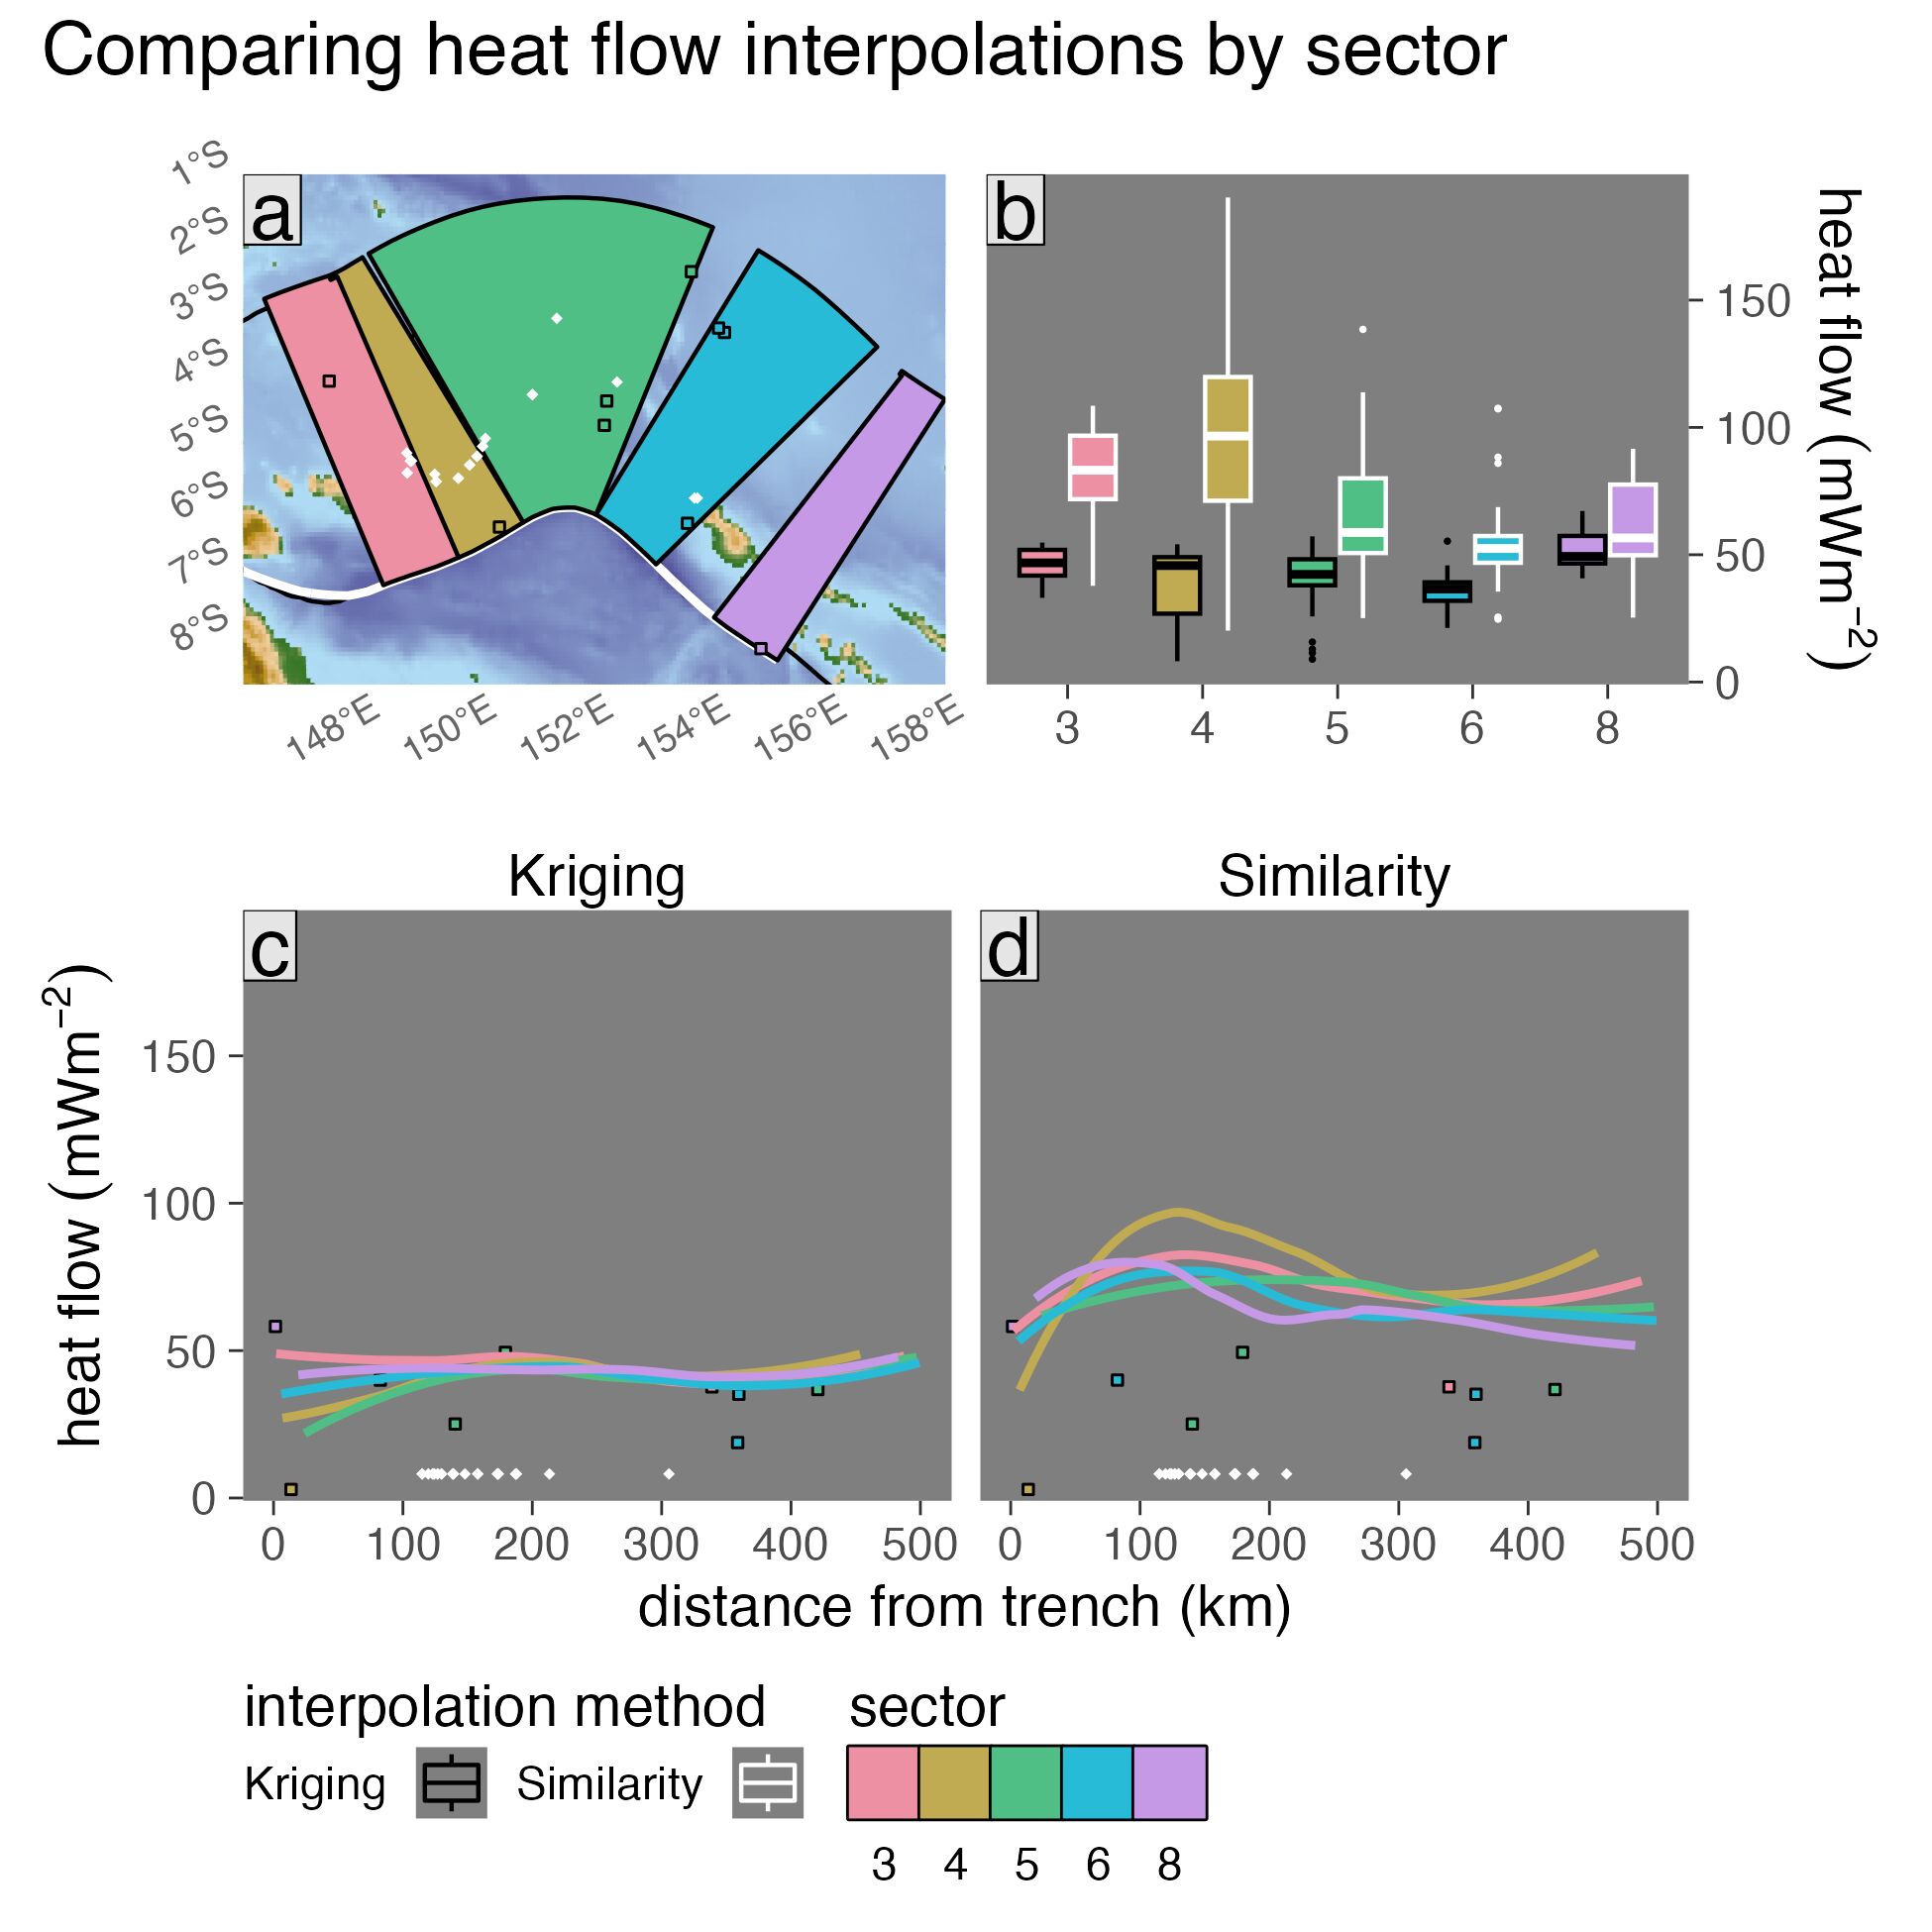 Surface heat flow profiles for New Britain Solomon upper-plate sectors. (a) Similarity and Kriging predictions across sectors are very distinguishable with non-overlapping IQRs (boxes). (b) Profiles are computed by finding orthogonal distances between the segment boundary (trench; bold black line) and 163 surface heat flow predictions within five 500 km-wide sectors (colored polygons). Profiles (colored curves with 95% confidence intervals) of (c) Kriging predictions are lower and show a narrow distribution compared to (d) Similarity profiles. Colored squares are ThermoGlobe data from Lucazeau (2019). Segment boundary and volcanoes (gold diamonds) defined by Syracuse & Abers (2006). Plate boundaries (bold black lines) defined by Lawver et al. (2018). Profile curves in (c) are LOESS regressions through three-point running averages (small colored data points).